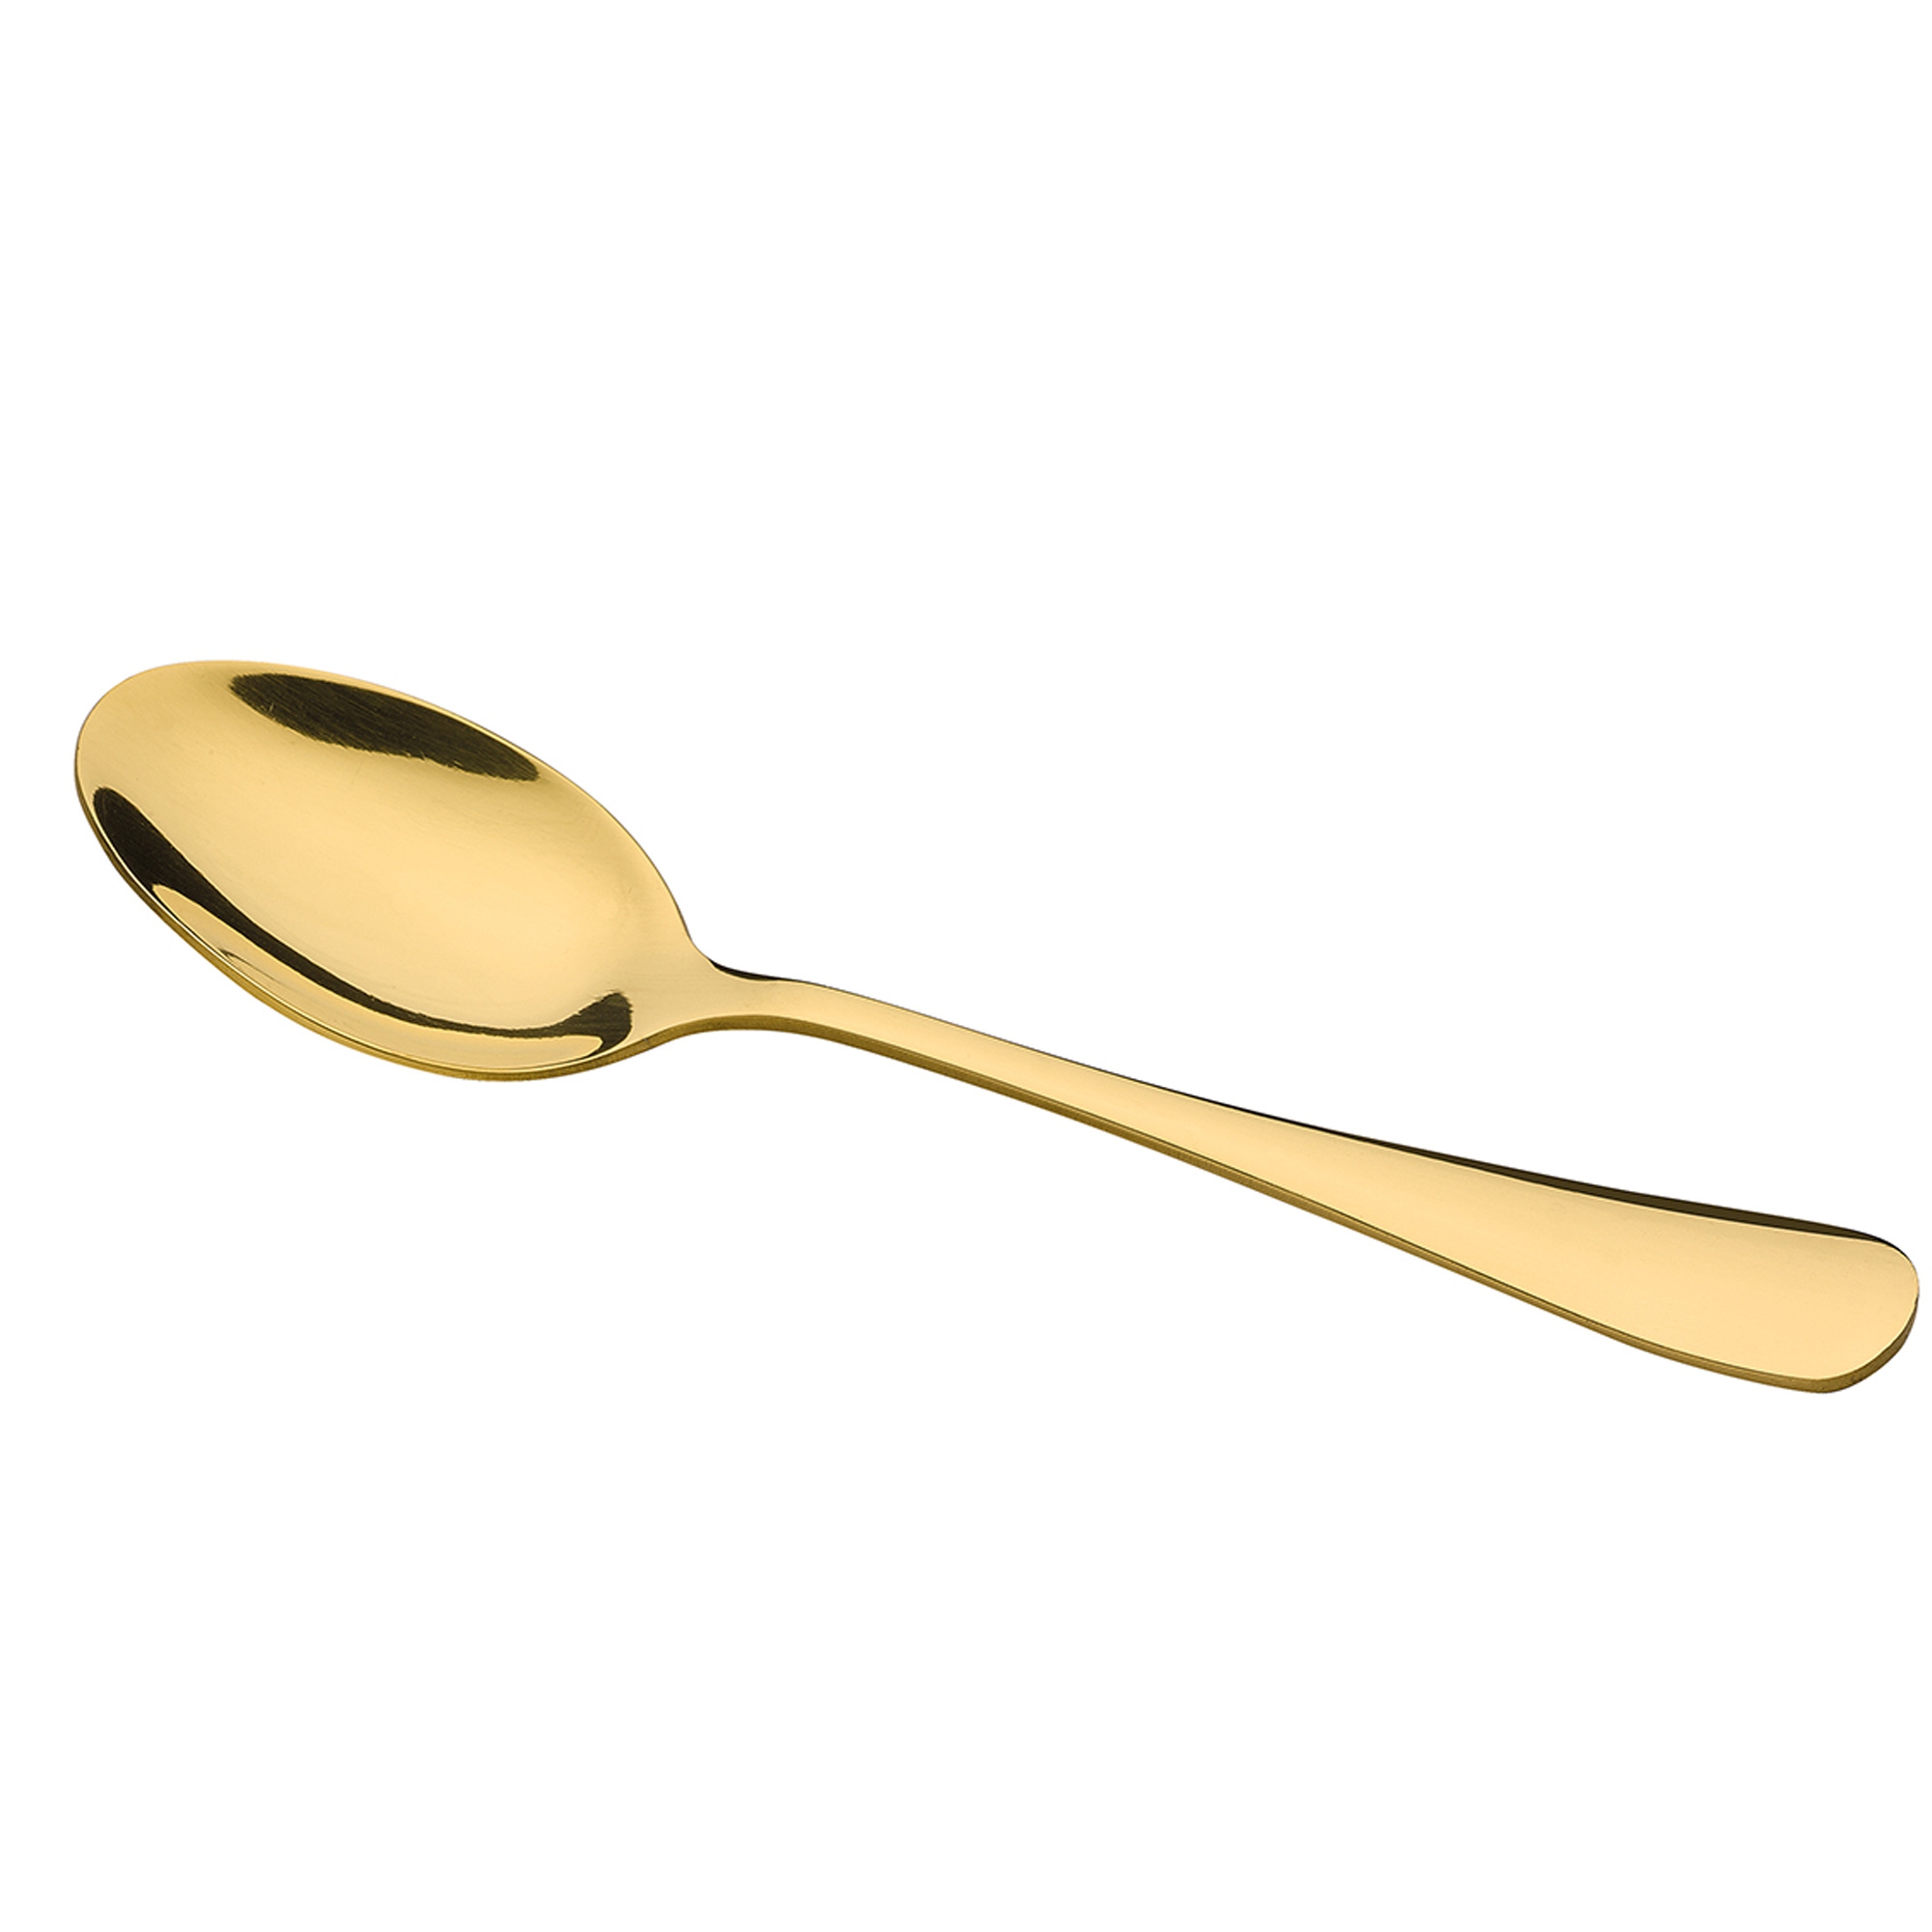 Cilio - Coffee spoon set of 6 - Gold